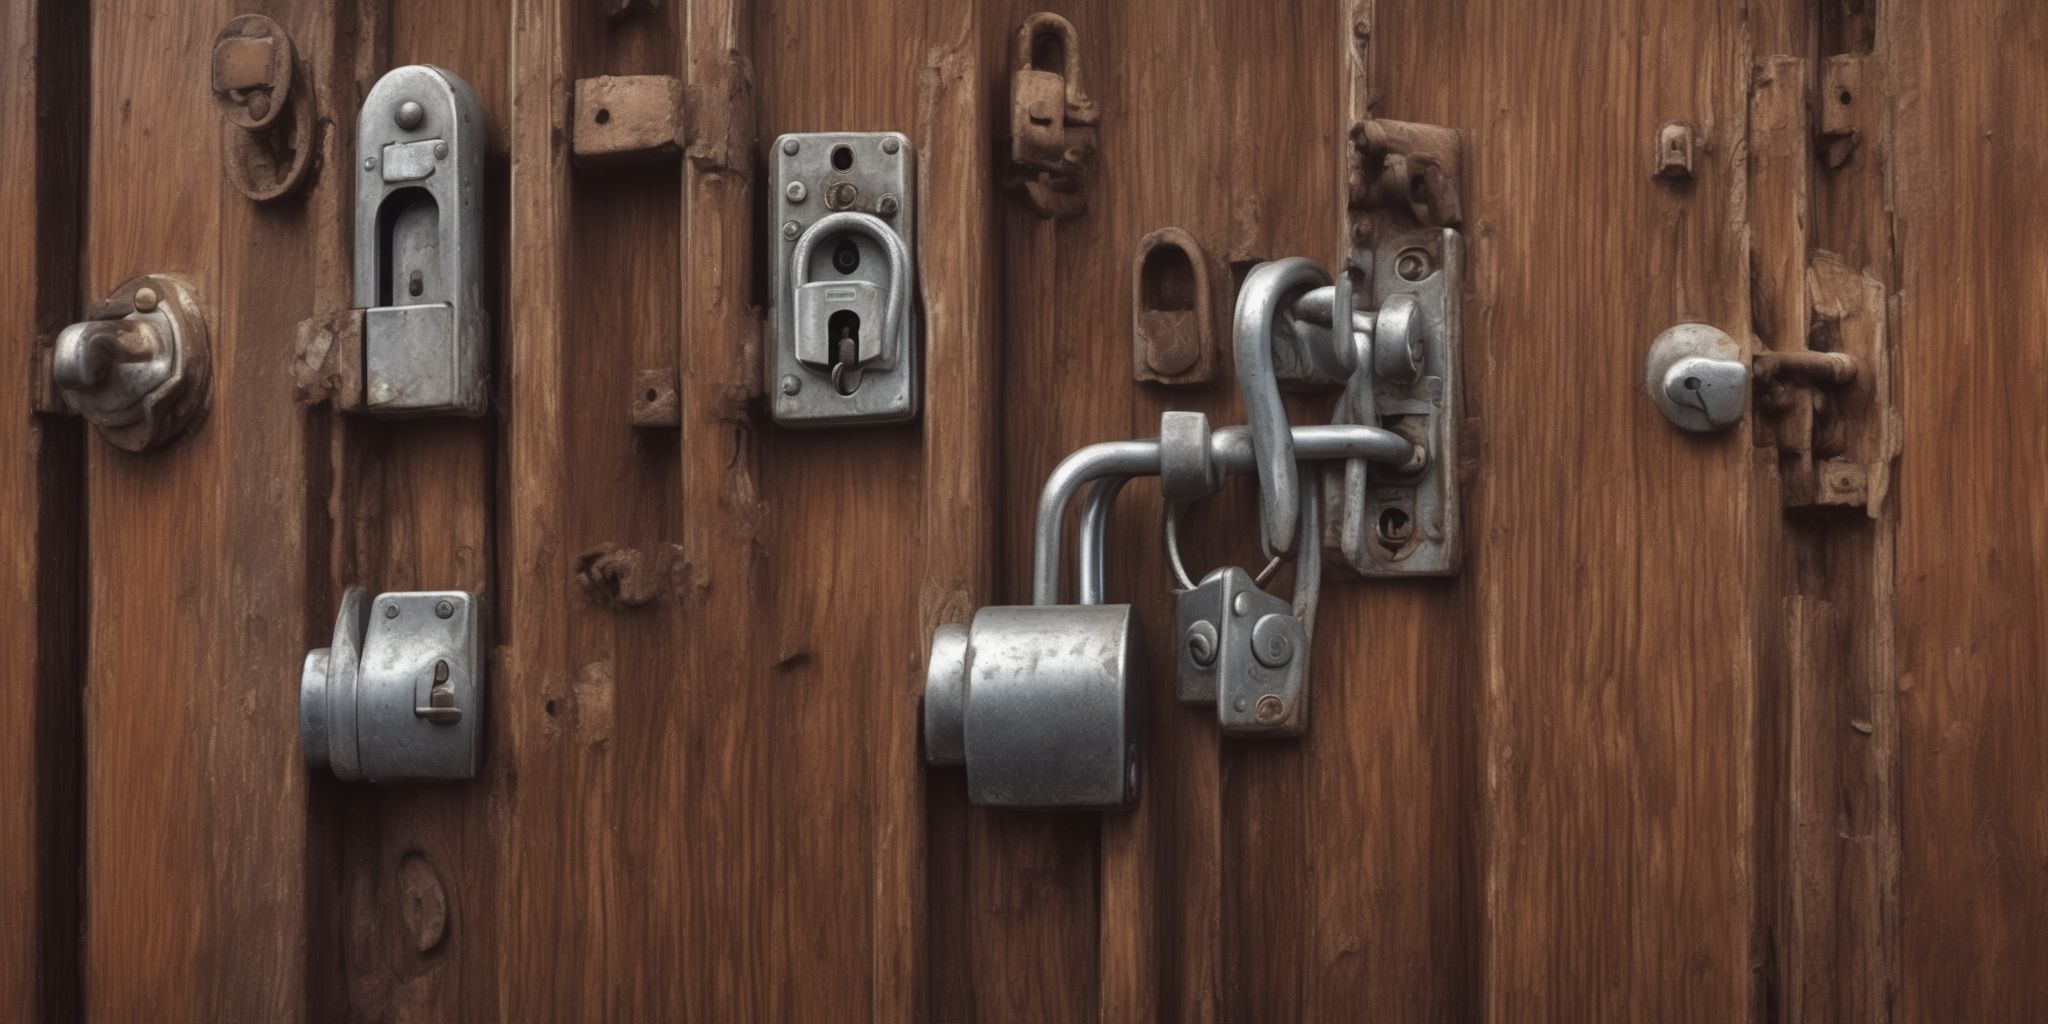 Lock  in realistic, photographic style